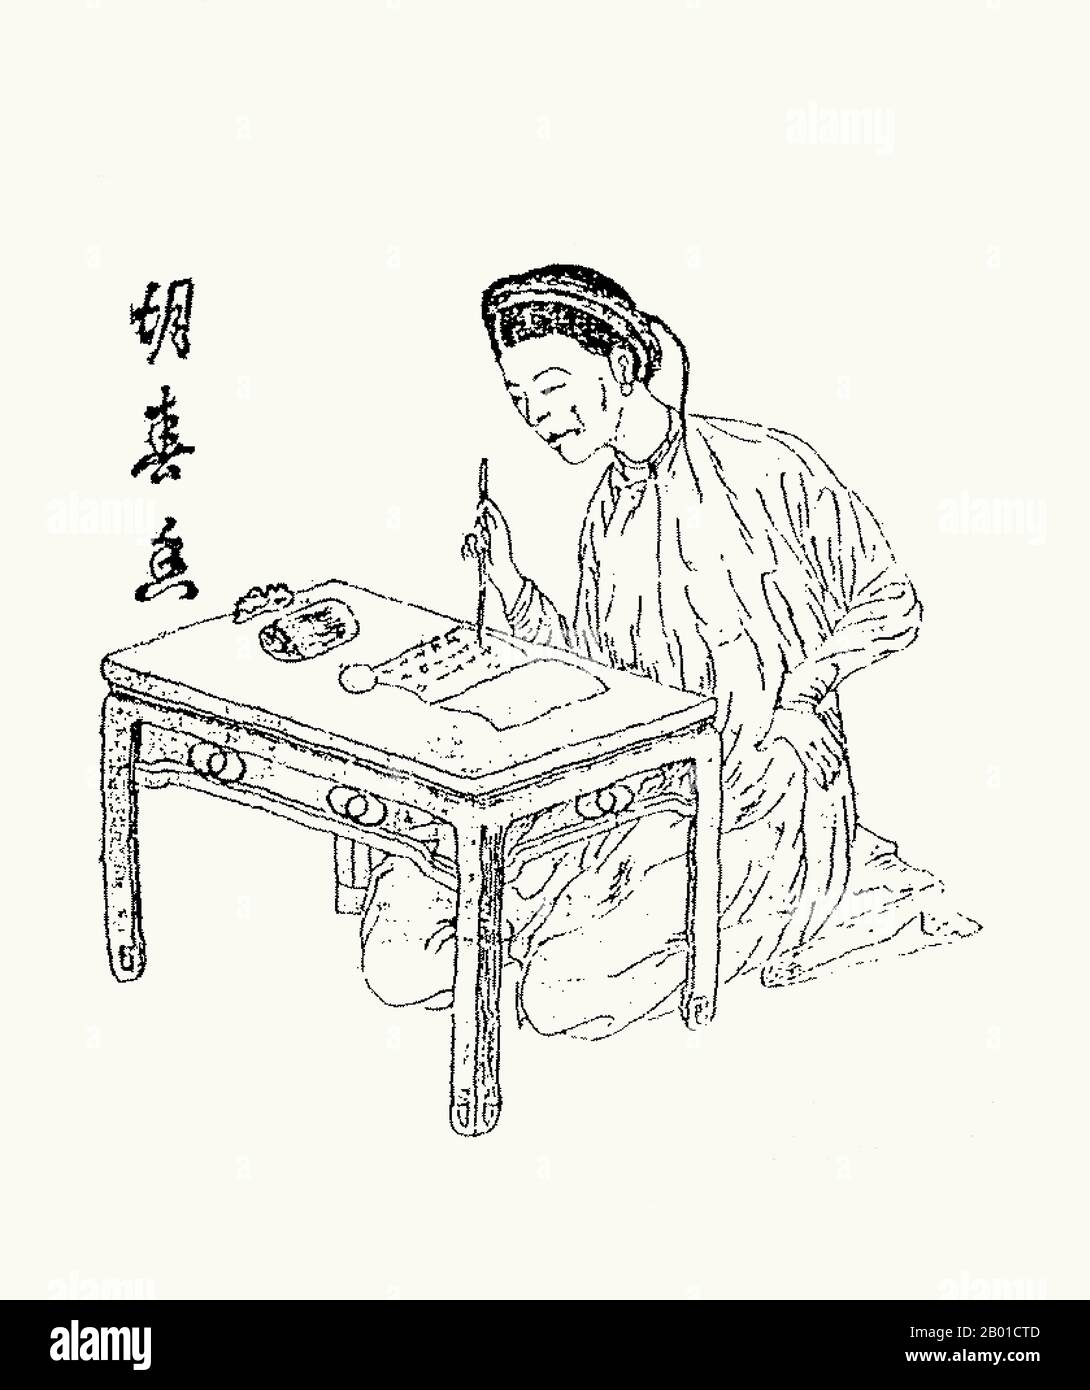 Vietnam: Ho Xuan Huong (1772-1822), Le Dynasty poetess and proto-feminist. Ink drawing, 1916.  Hồ Xuân Hương was a Vietnamese poet born at the end of the Lê Dynasty. She grew up in an era of political and social turmoil - the time of the Tây Sơn Rebellion and a three-decade civil war that led to Nguyễn Ánh seizing power as Emperor Gia Long and founding the Nguyen Dynasty.  Rather than using Chữ Hán (Chinese) characters, Huong wrote poetry using Chữ Nôm (Southern Script), which adapts Chinese characters for writing demotic Vietnamese. She is considered one of Vietnam's great classical poets. Stock Photo